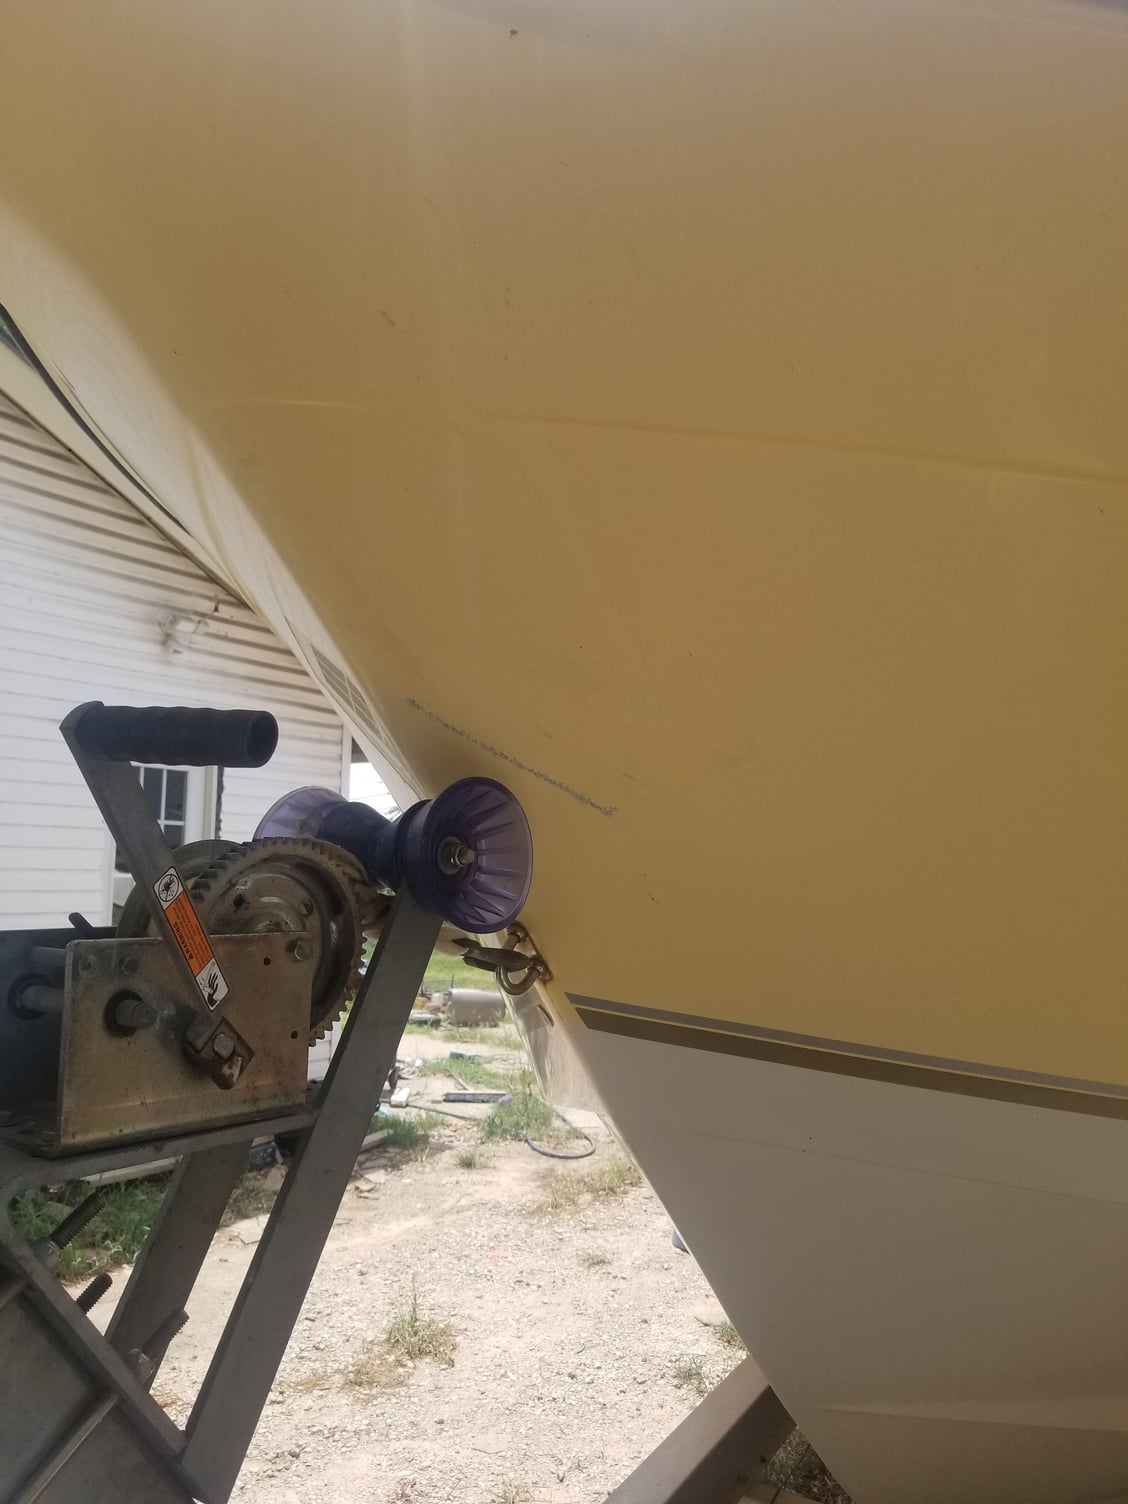 How to fix A little scratch from the trailer on a windy 